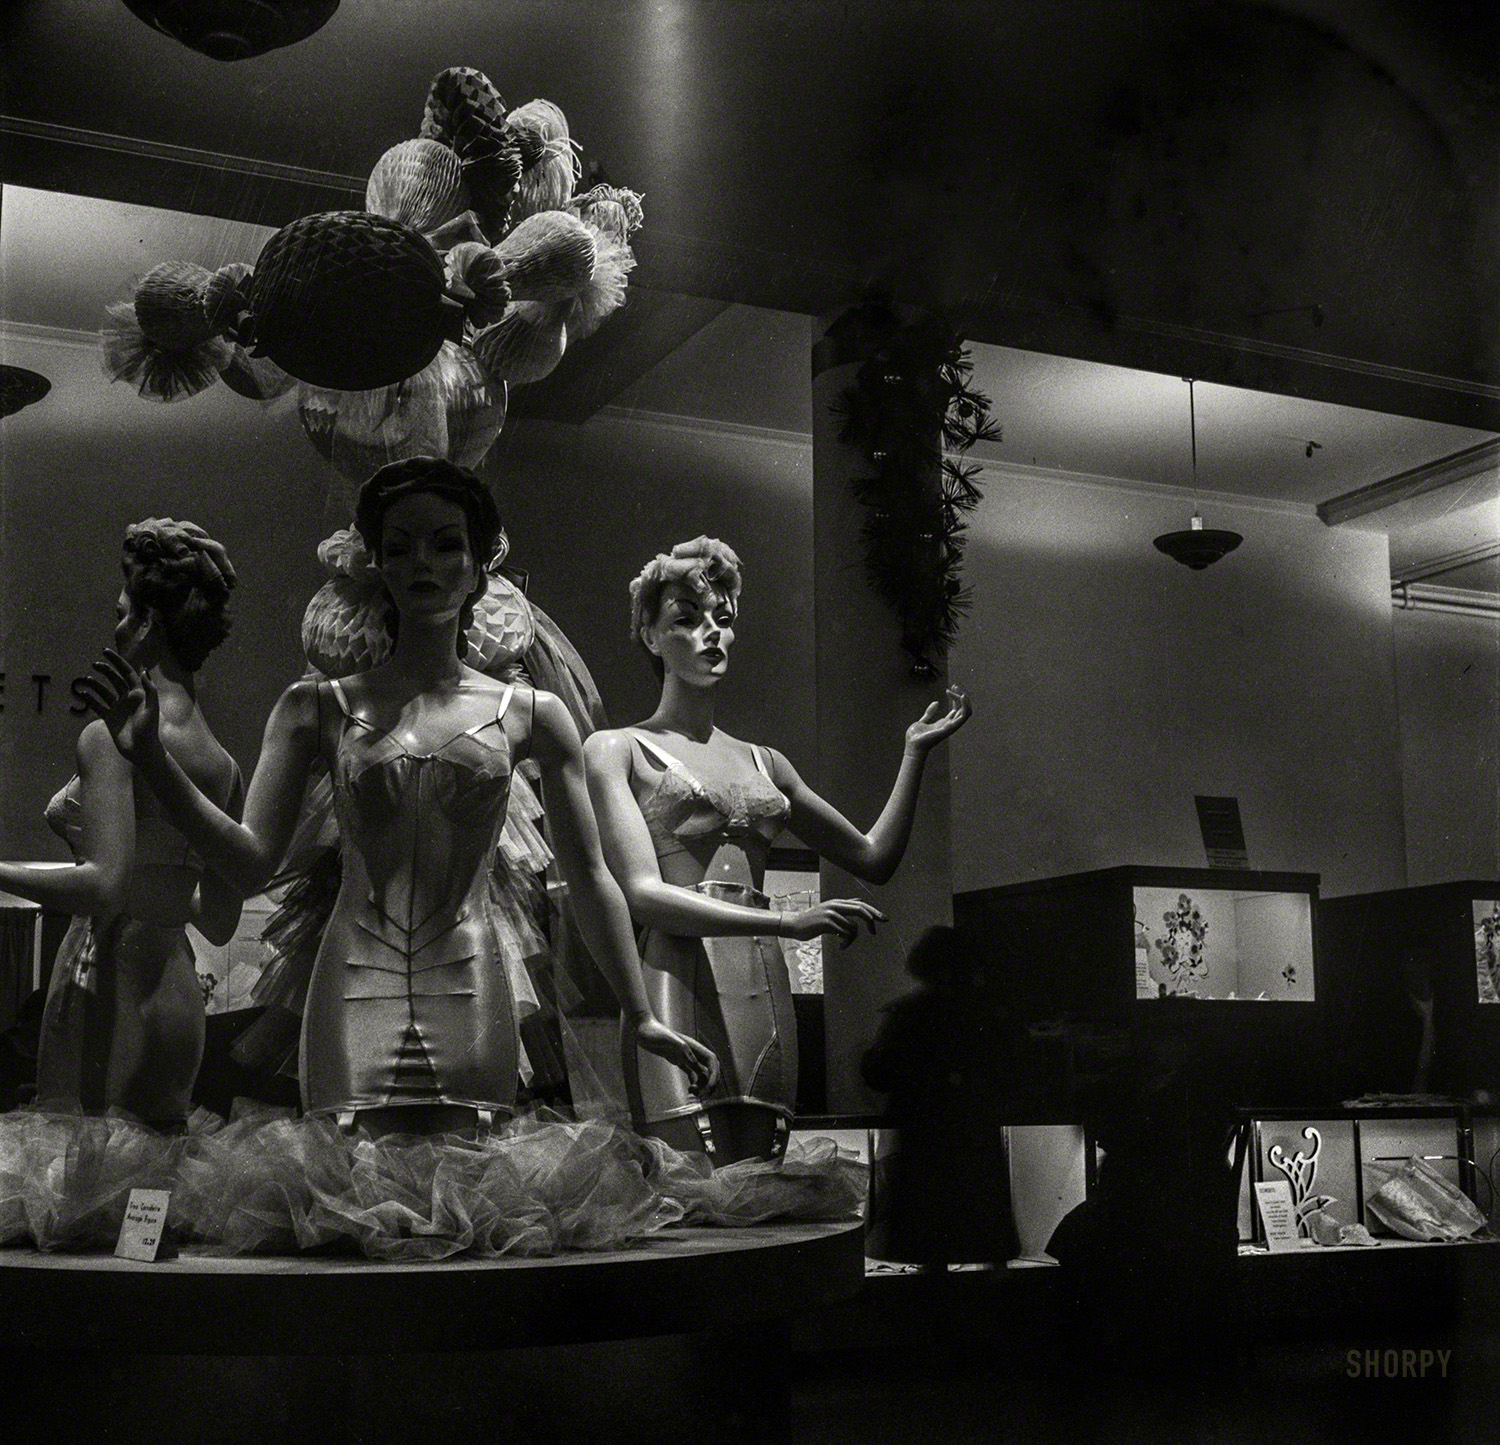 December 1942. "Corset display at R.H. Macy department store the week before Christmas." Photo by Marjory Collins, Office of War Information. View full size.